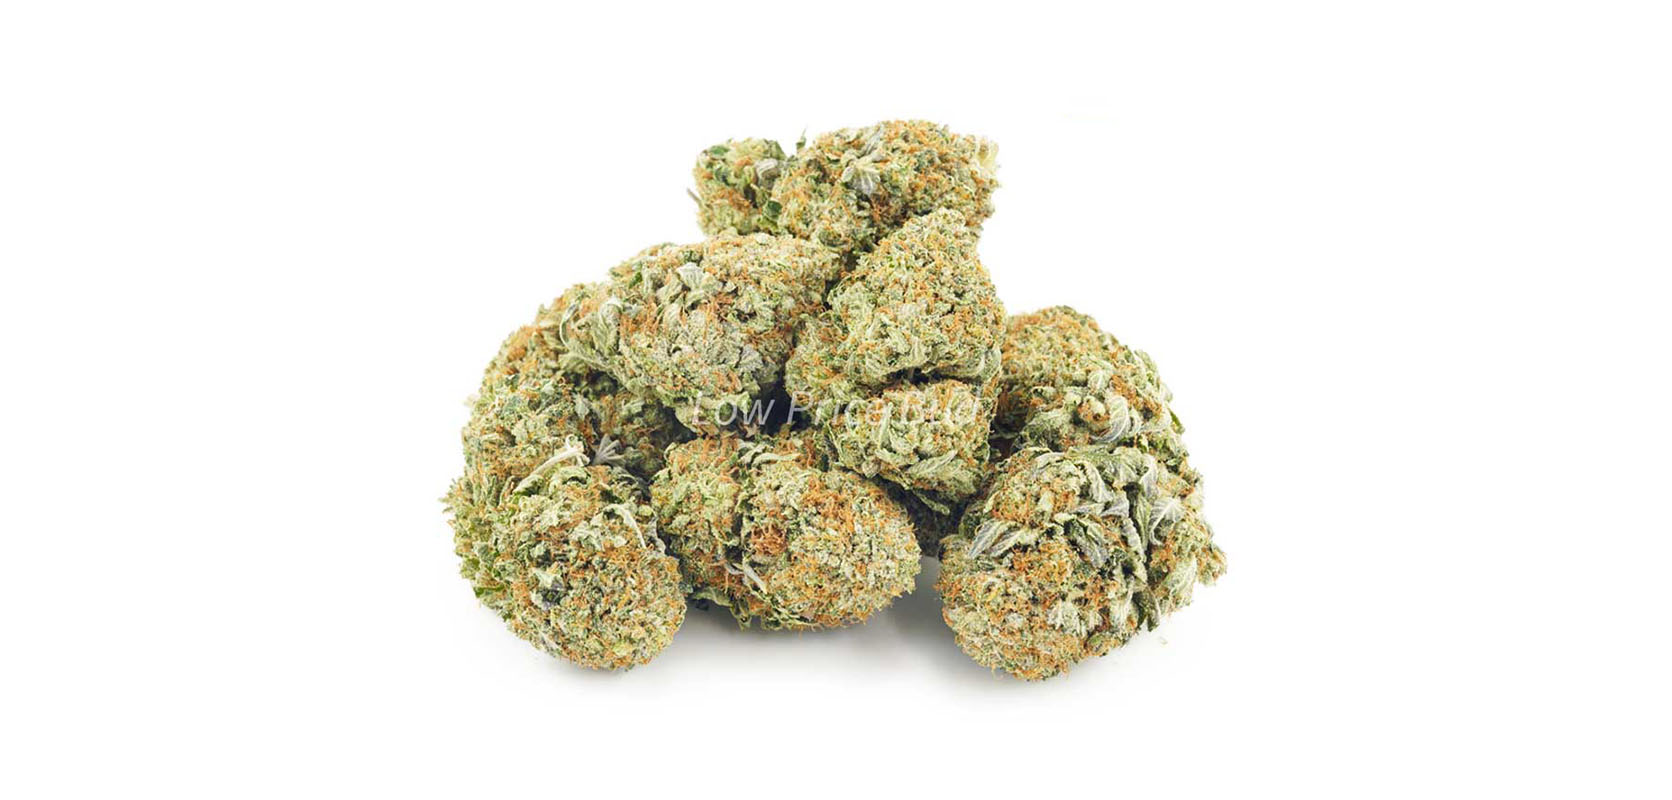 Maui Wowie weed online Canada. weed dispensary. cannabis canada. buy weeds online. 